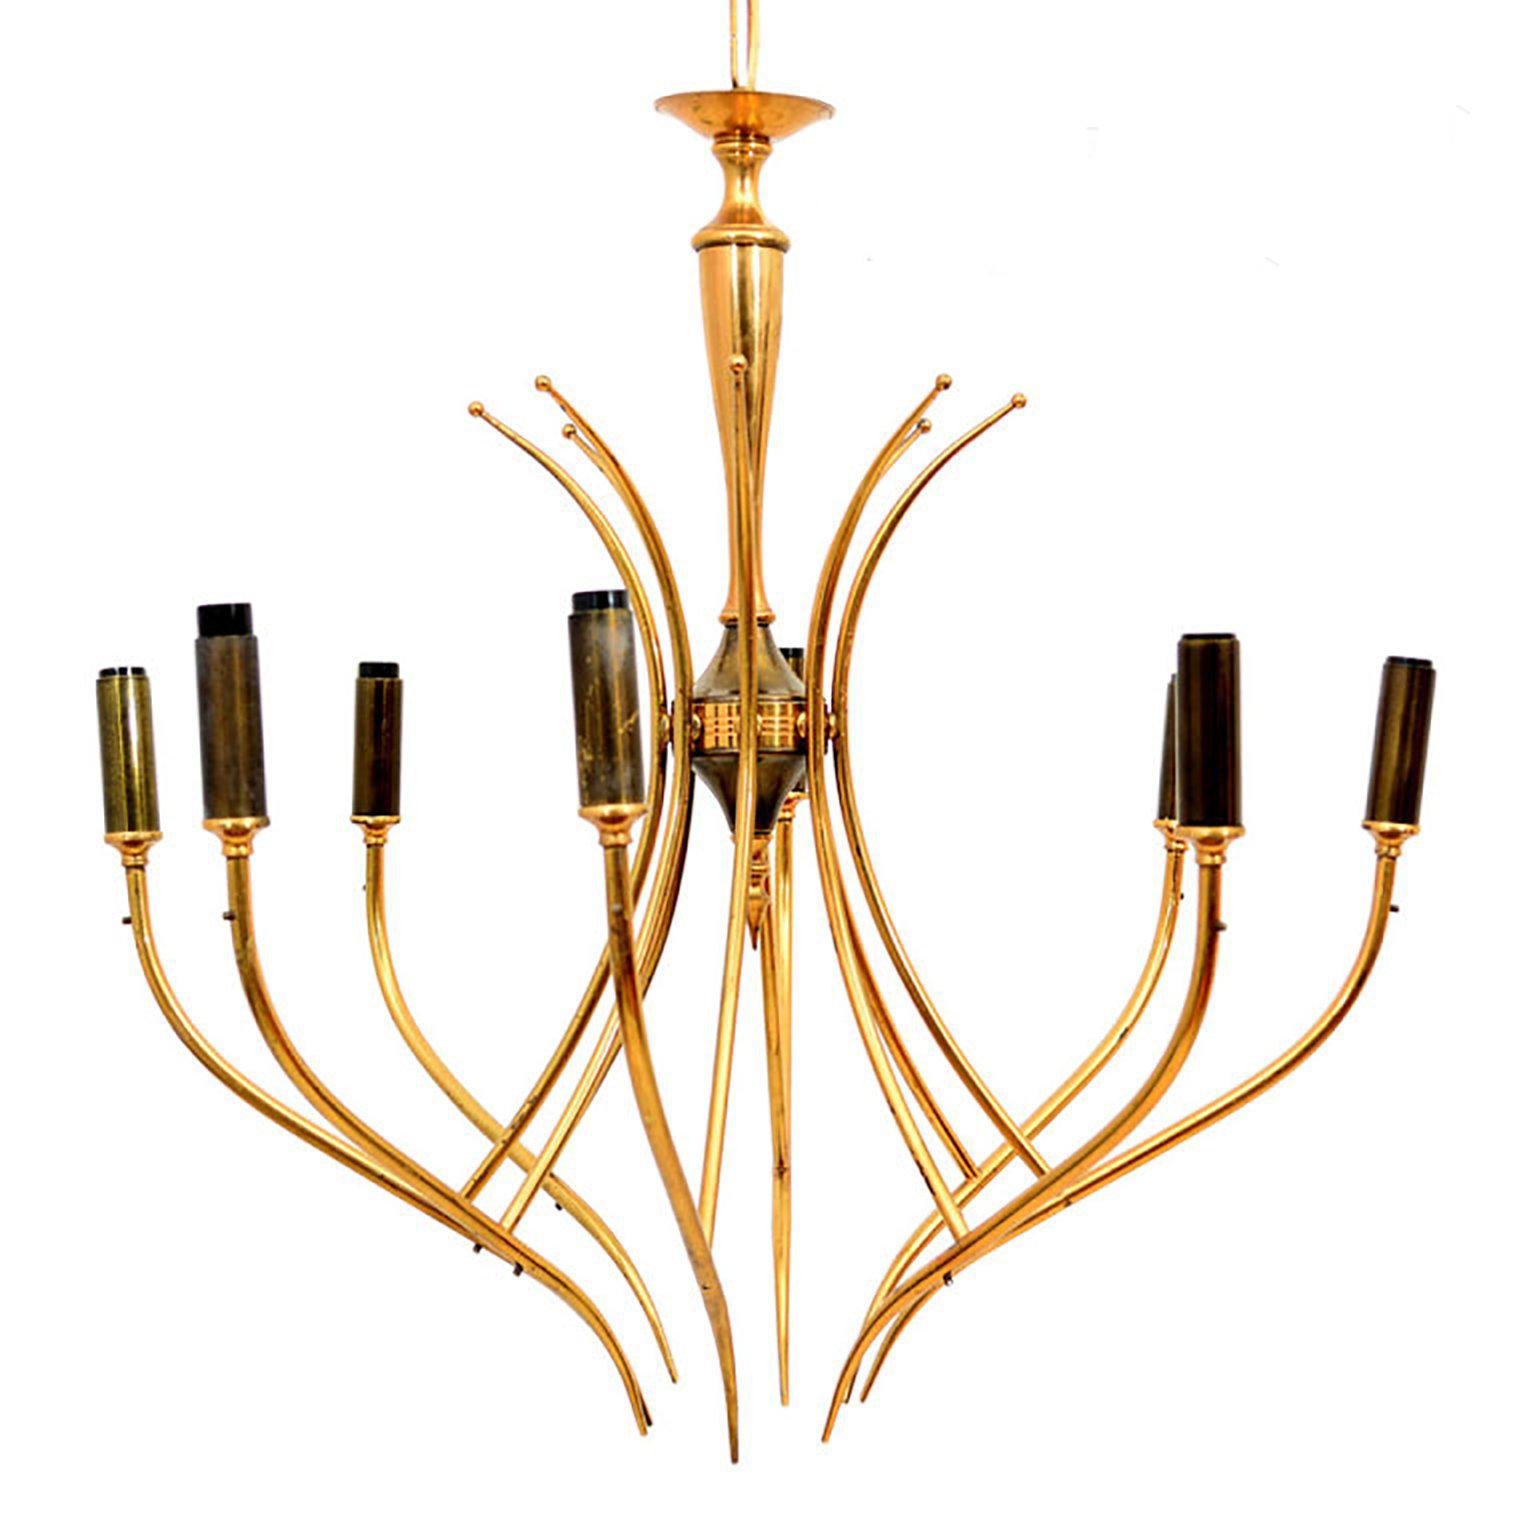 One of a kind Italian chandelier. Attributed to Guglielmo Ulrich. Chandelier is unmarked.

Very delicate and refine construction of the arms. Original finish with two-tone factory patina. The lighter tone has warm gold finish, the darker section